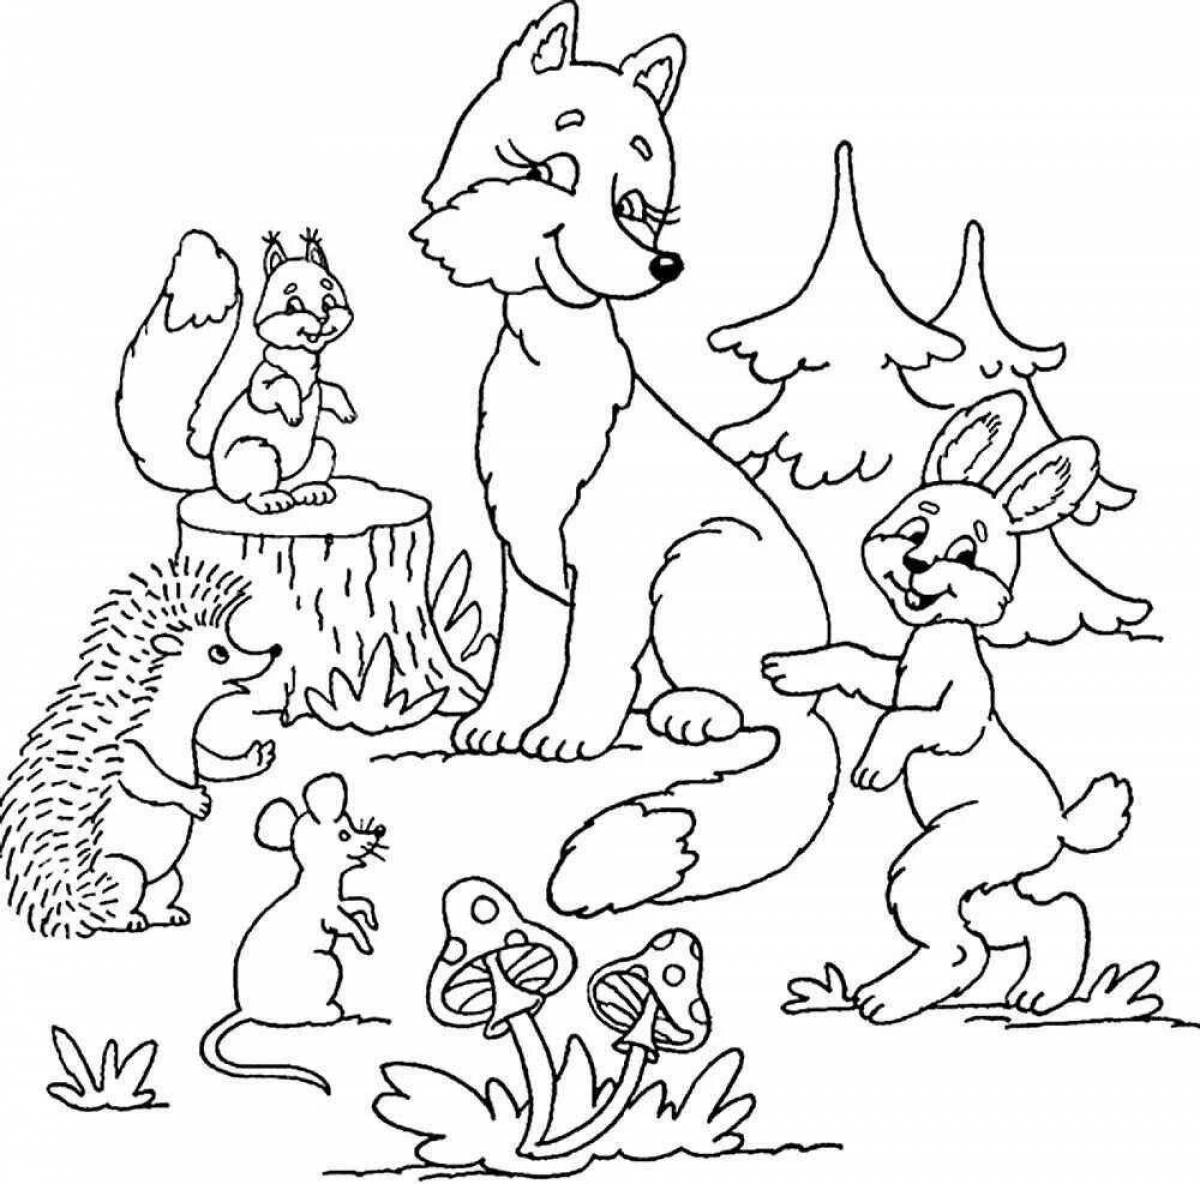 Colorful forest animals coloring page